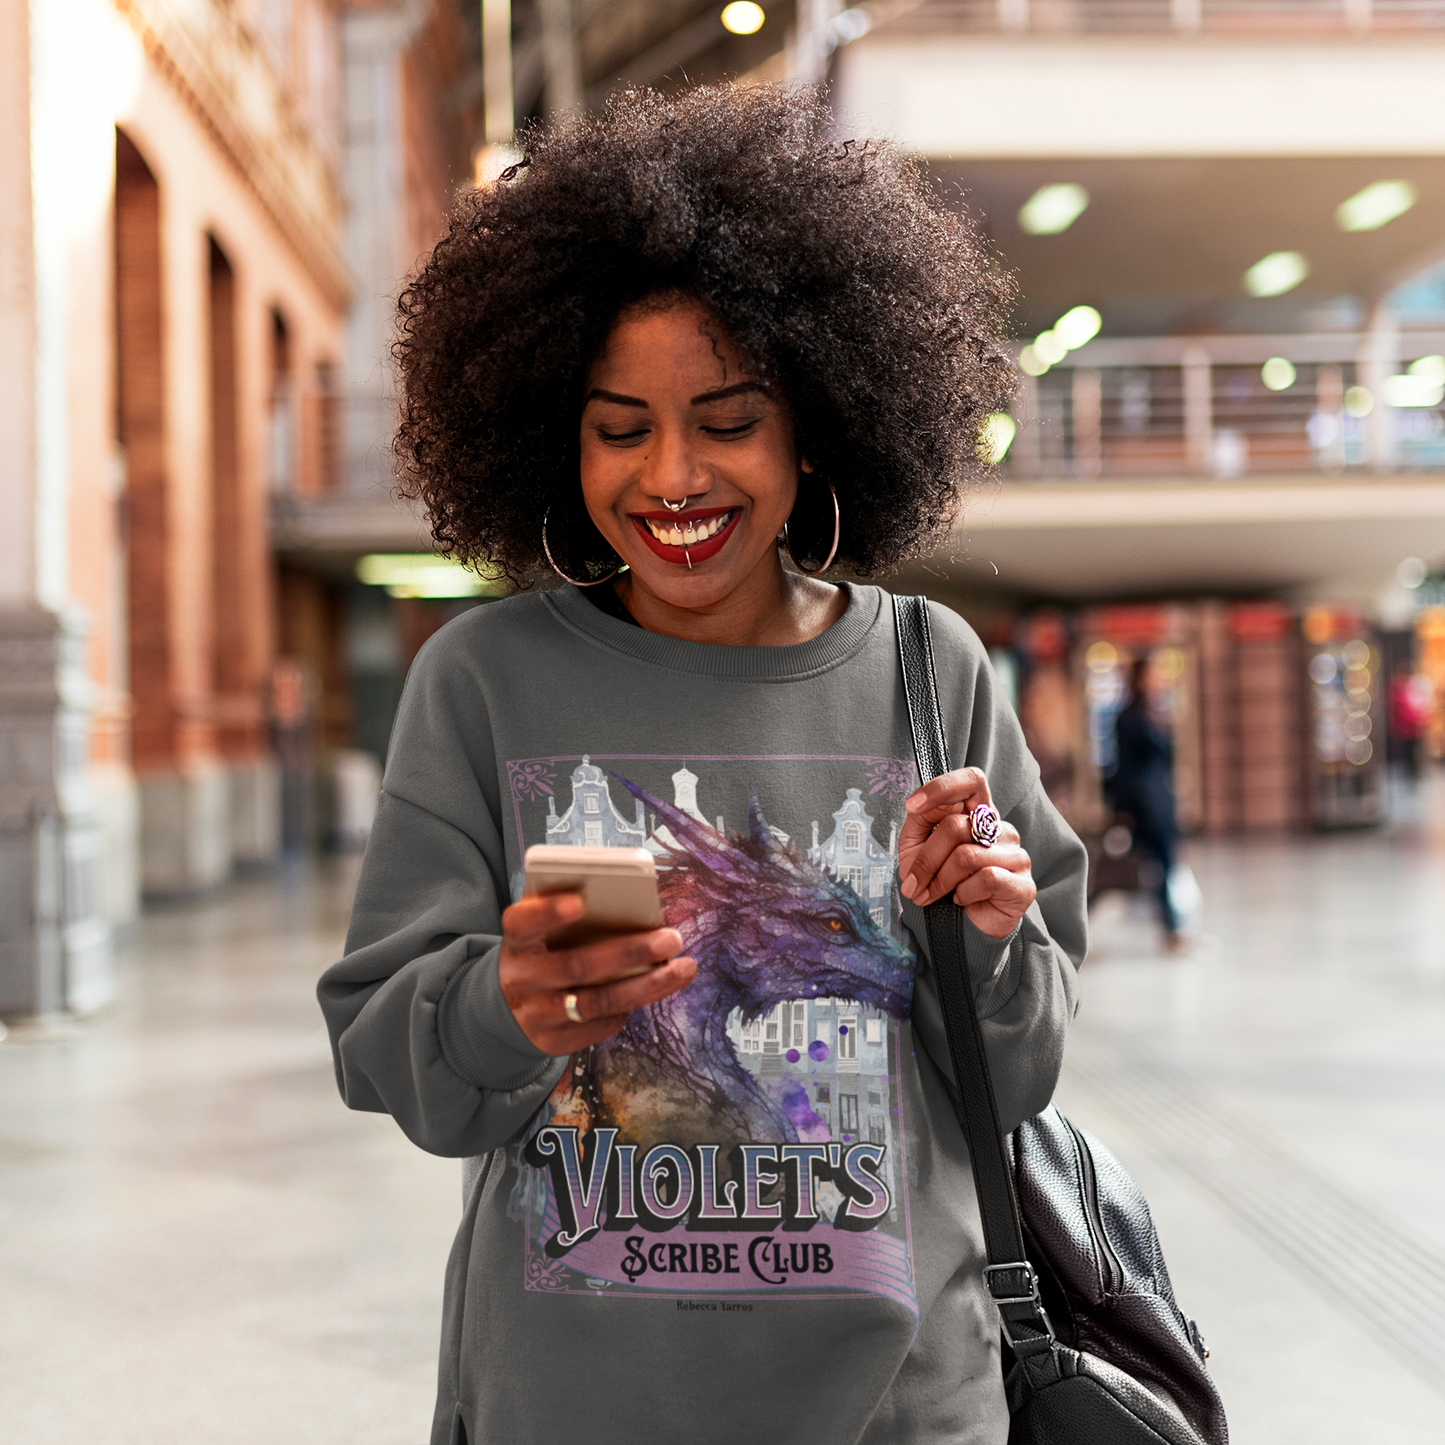 Violets Scribe Club Sweatshirt - Officially Licensed Fourth Wing by Rebecca Yarros Merchandise